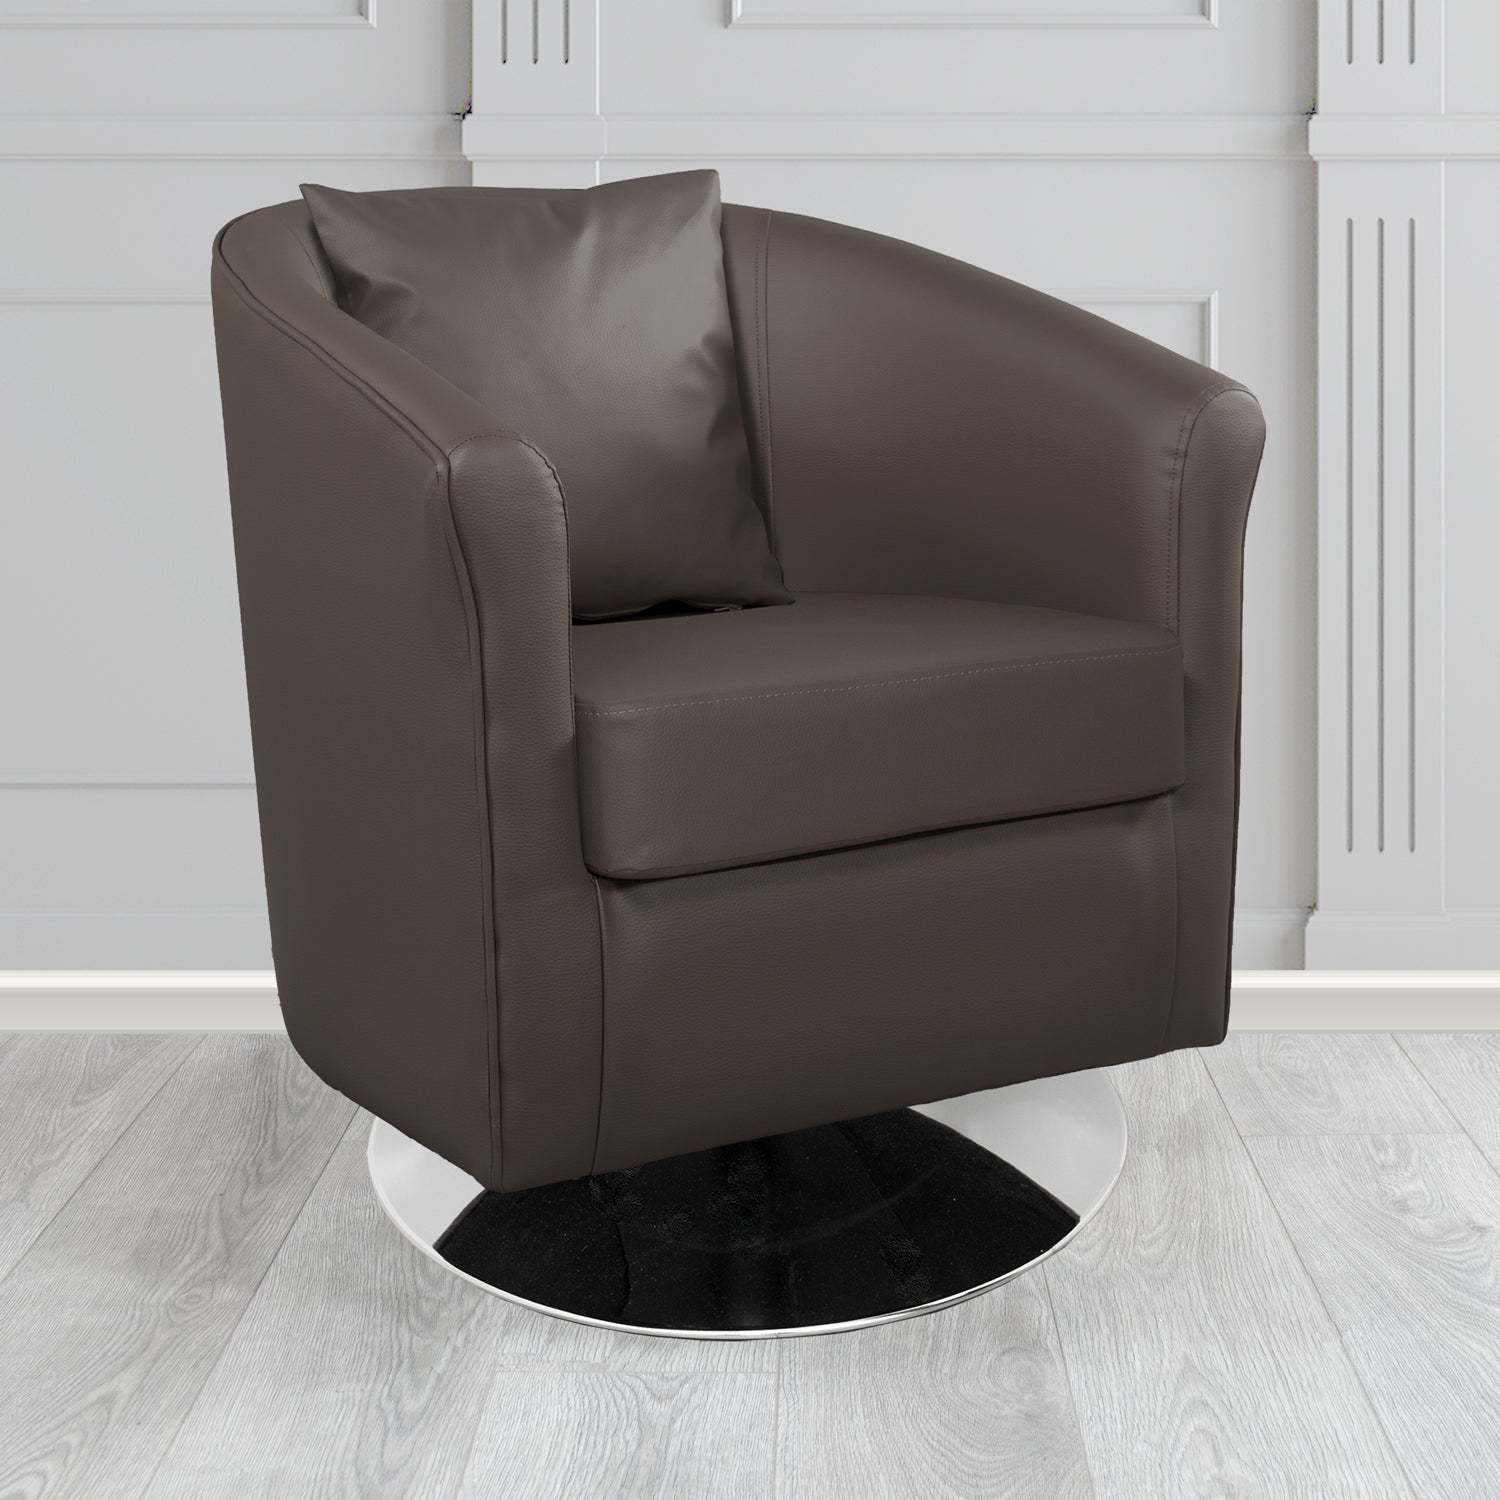 St Tropez Swivel Tub Chair with Scatter Cushion in Madrid Chocolate Faux Leather - The Tub Chair Shop